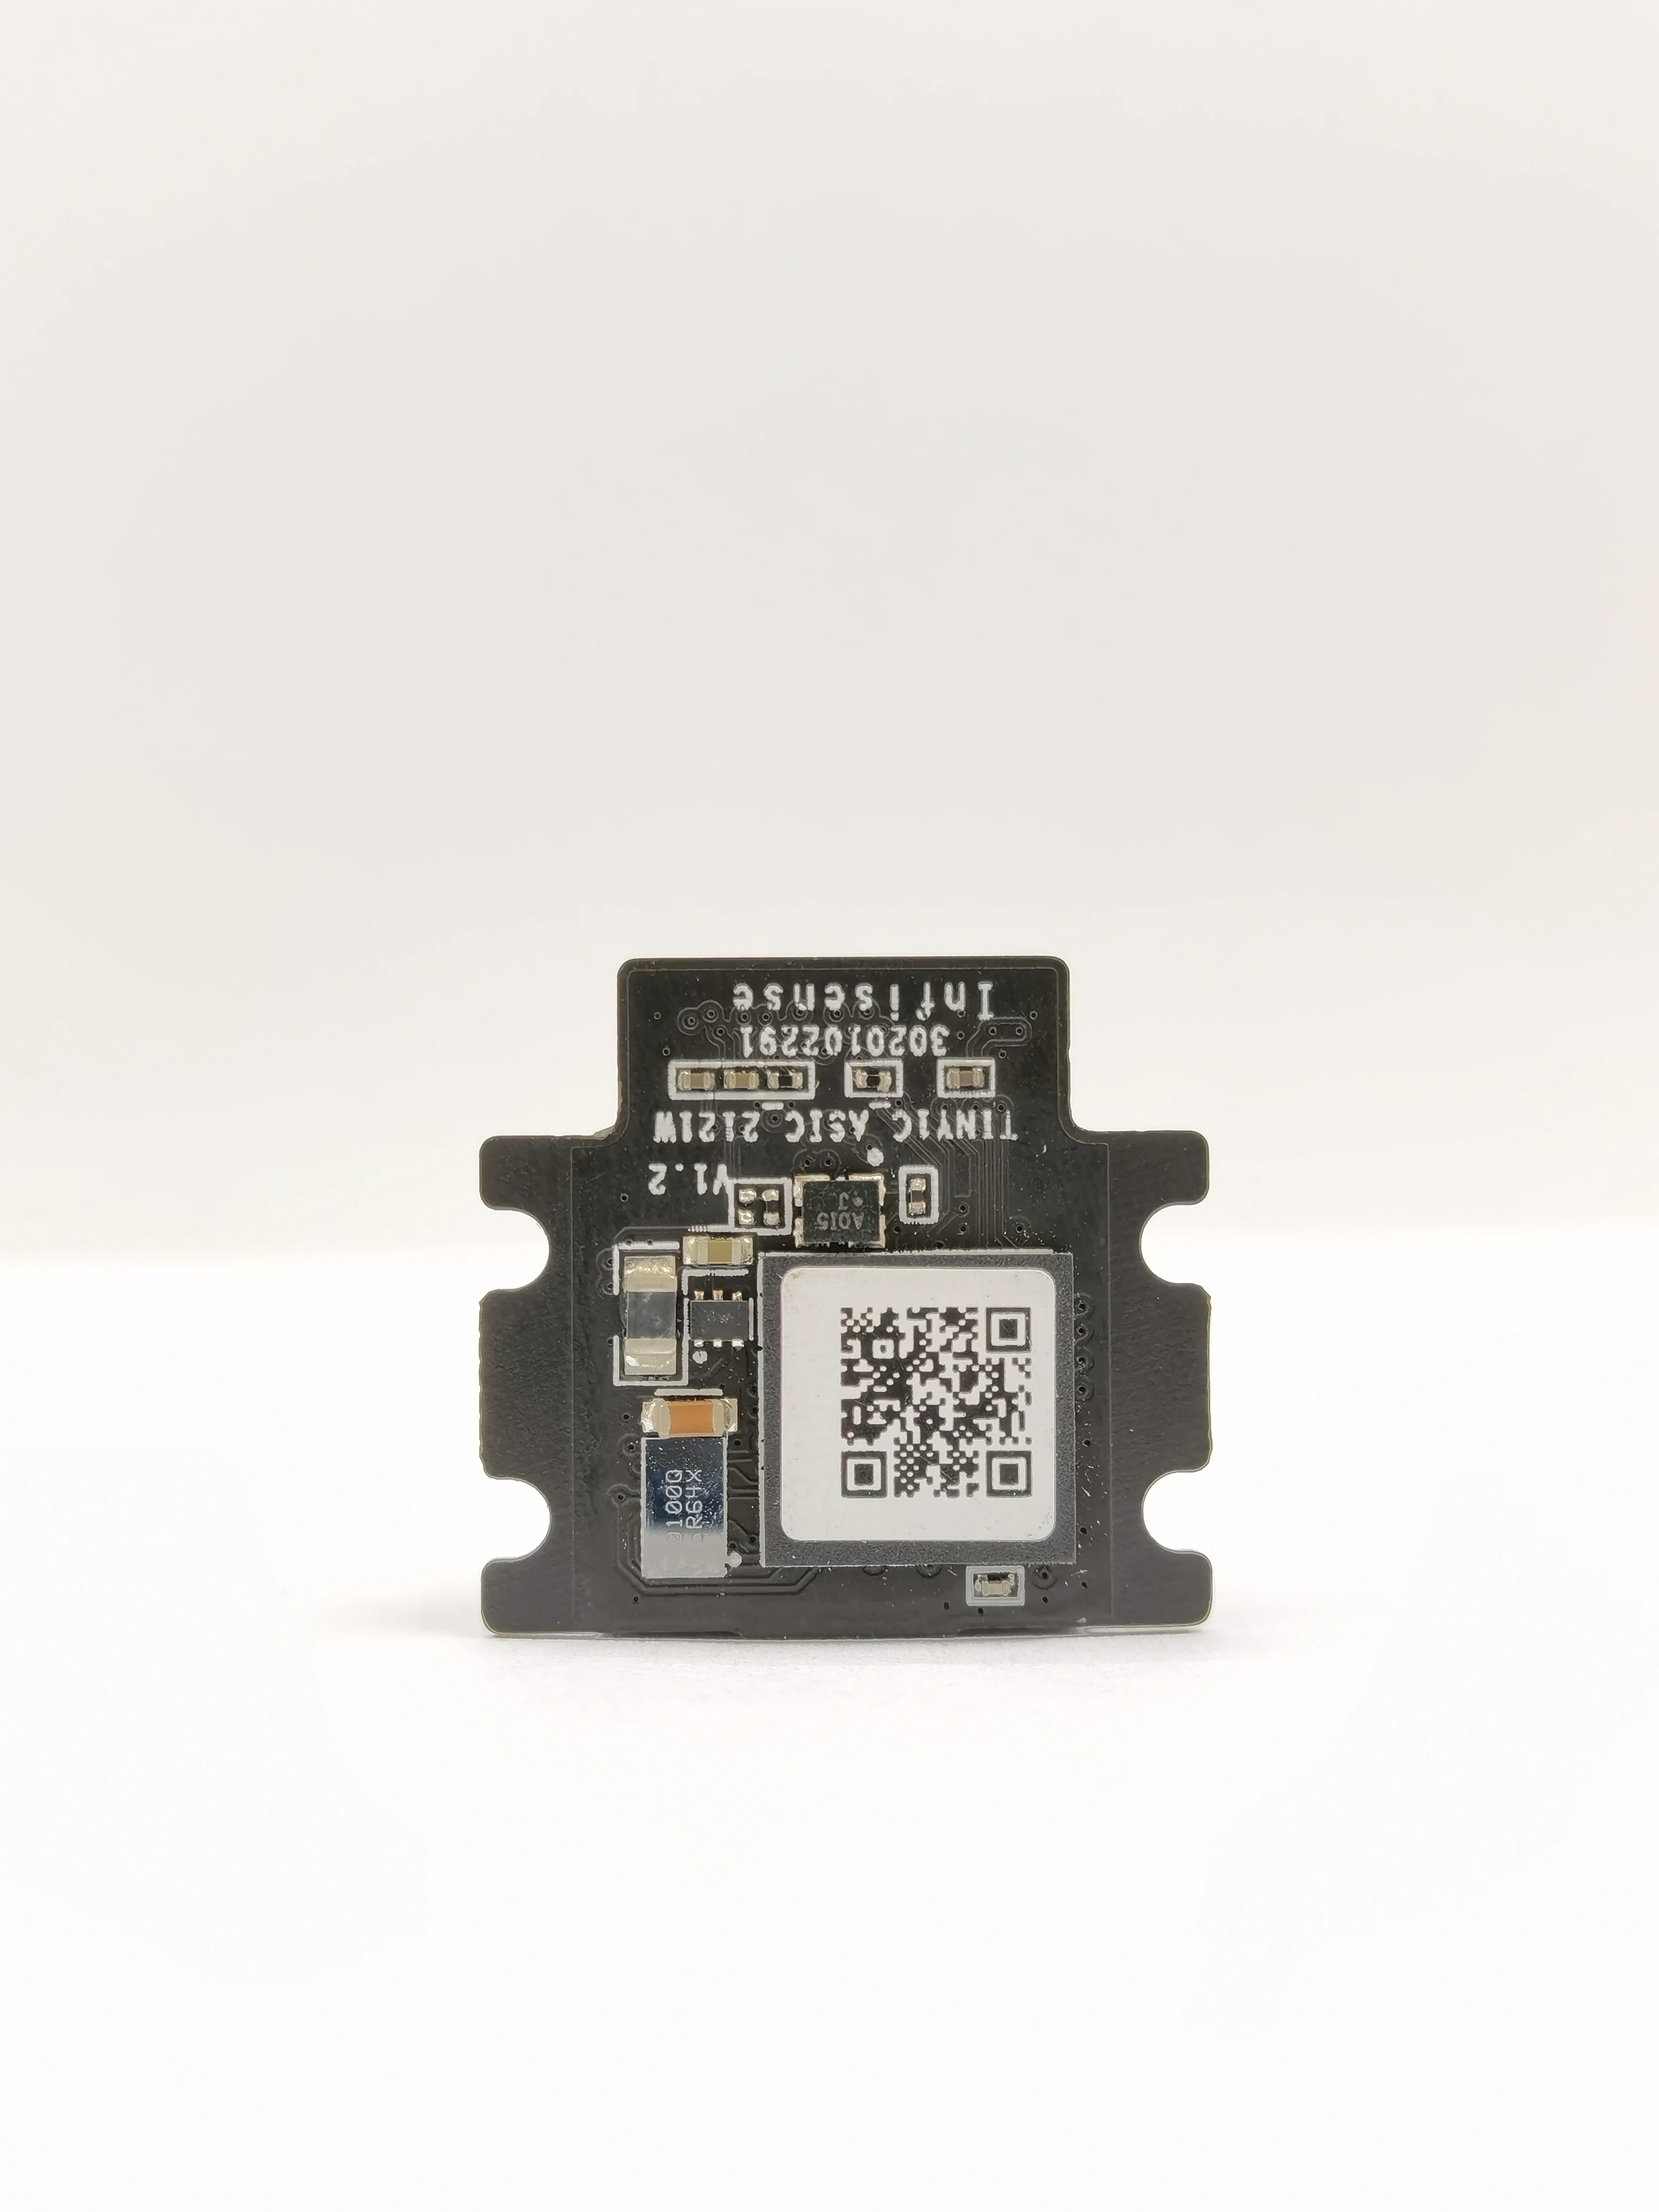 New 256*192 Resolution LWIR Uncooled Vox Thermal Imager Sensor Module Tiny1-C 25Hz Mini Thermal Imager enlarge